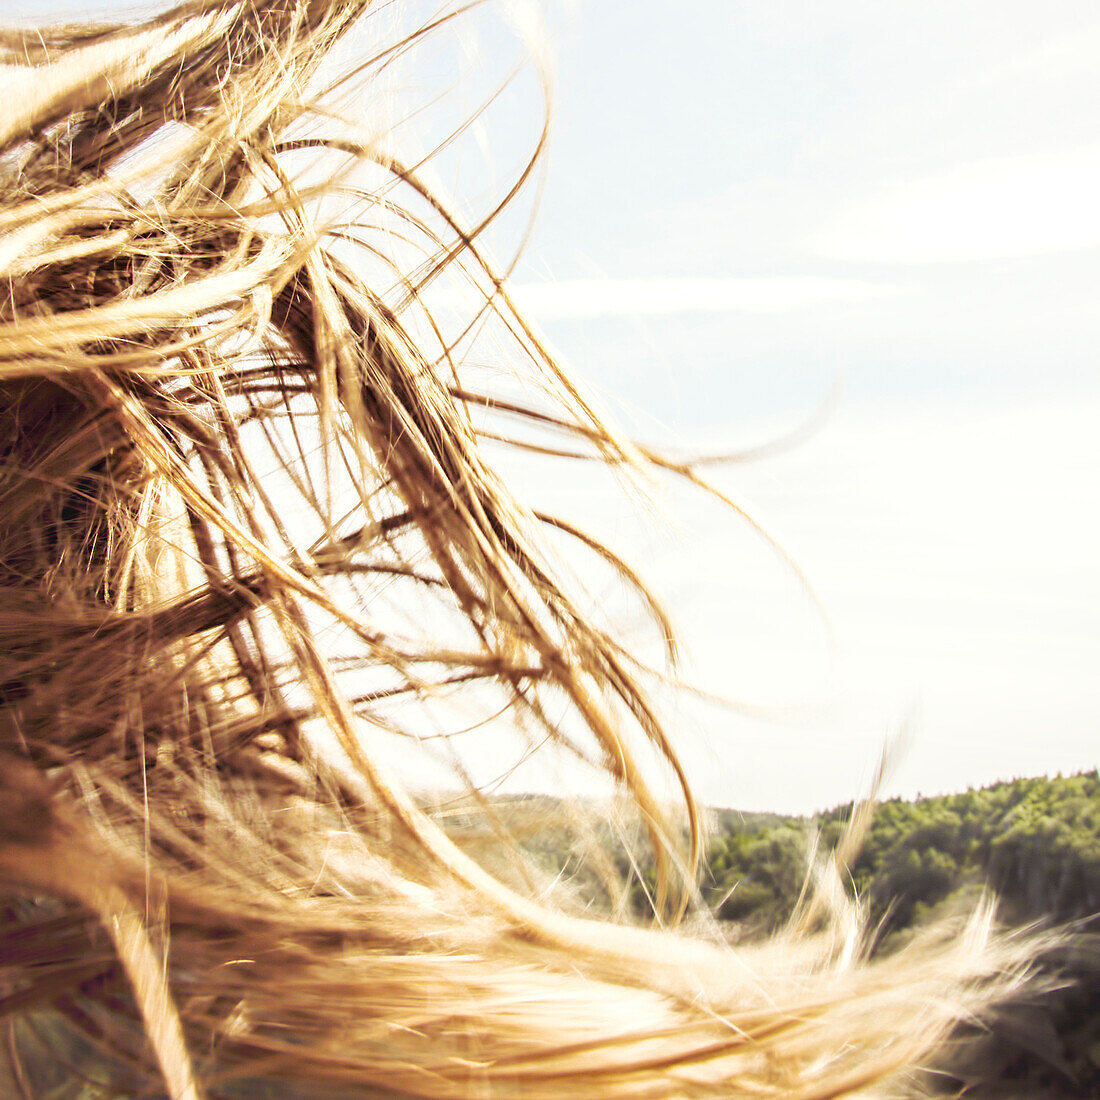 Tangled Hair Of A Young Girl Waving In The Wind